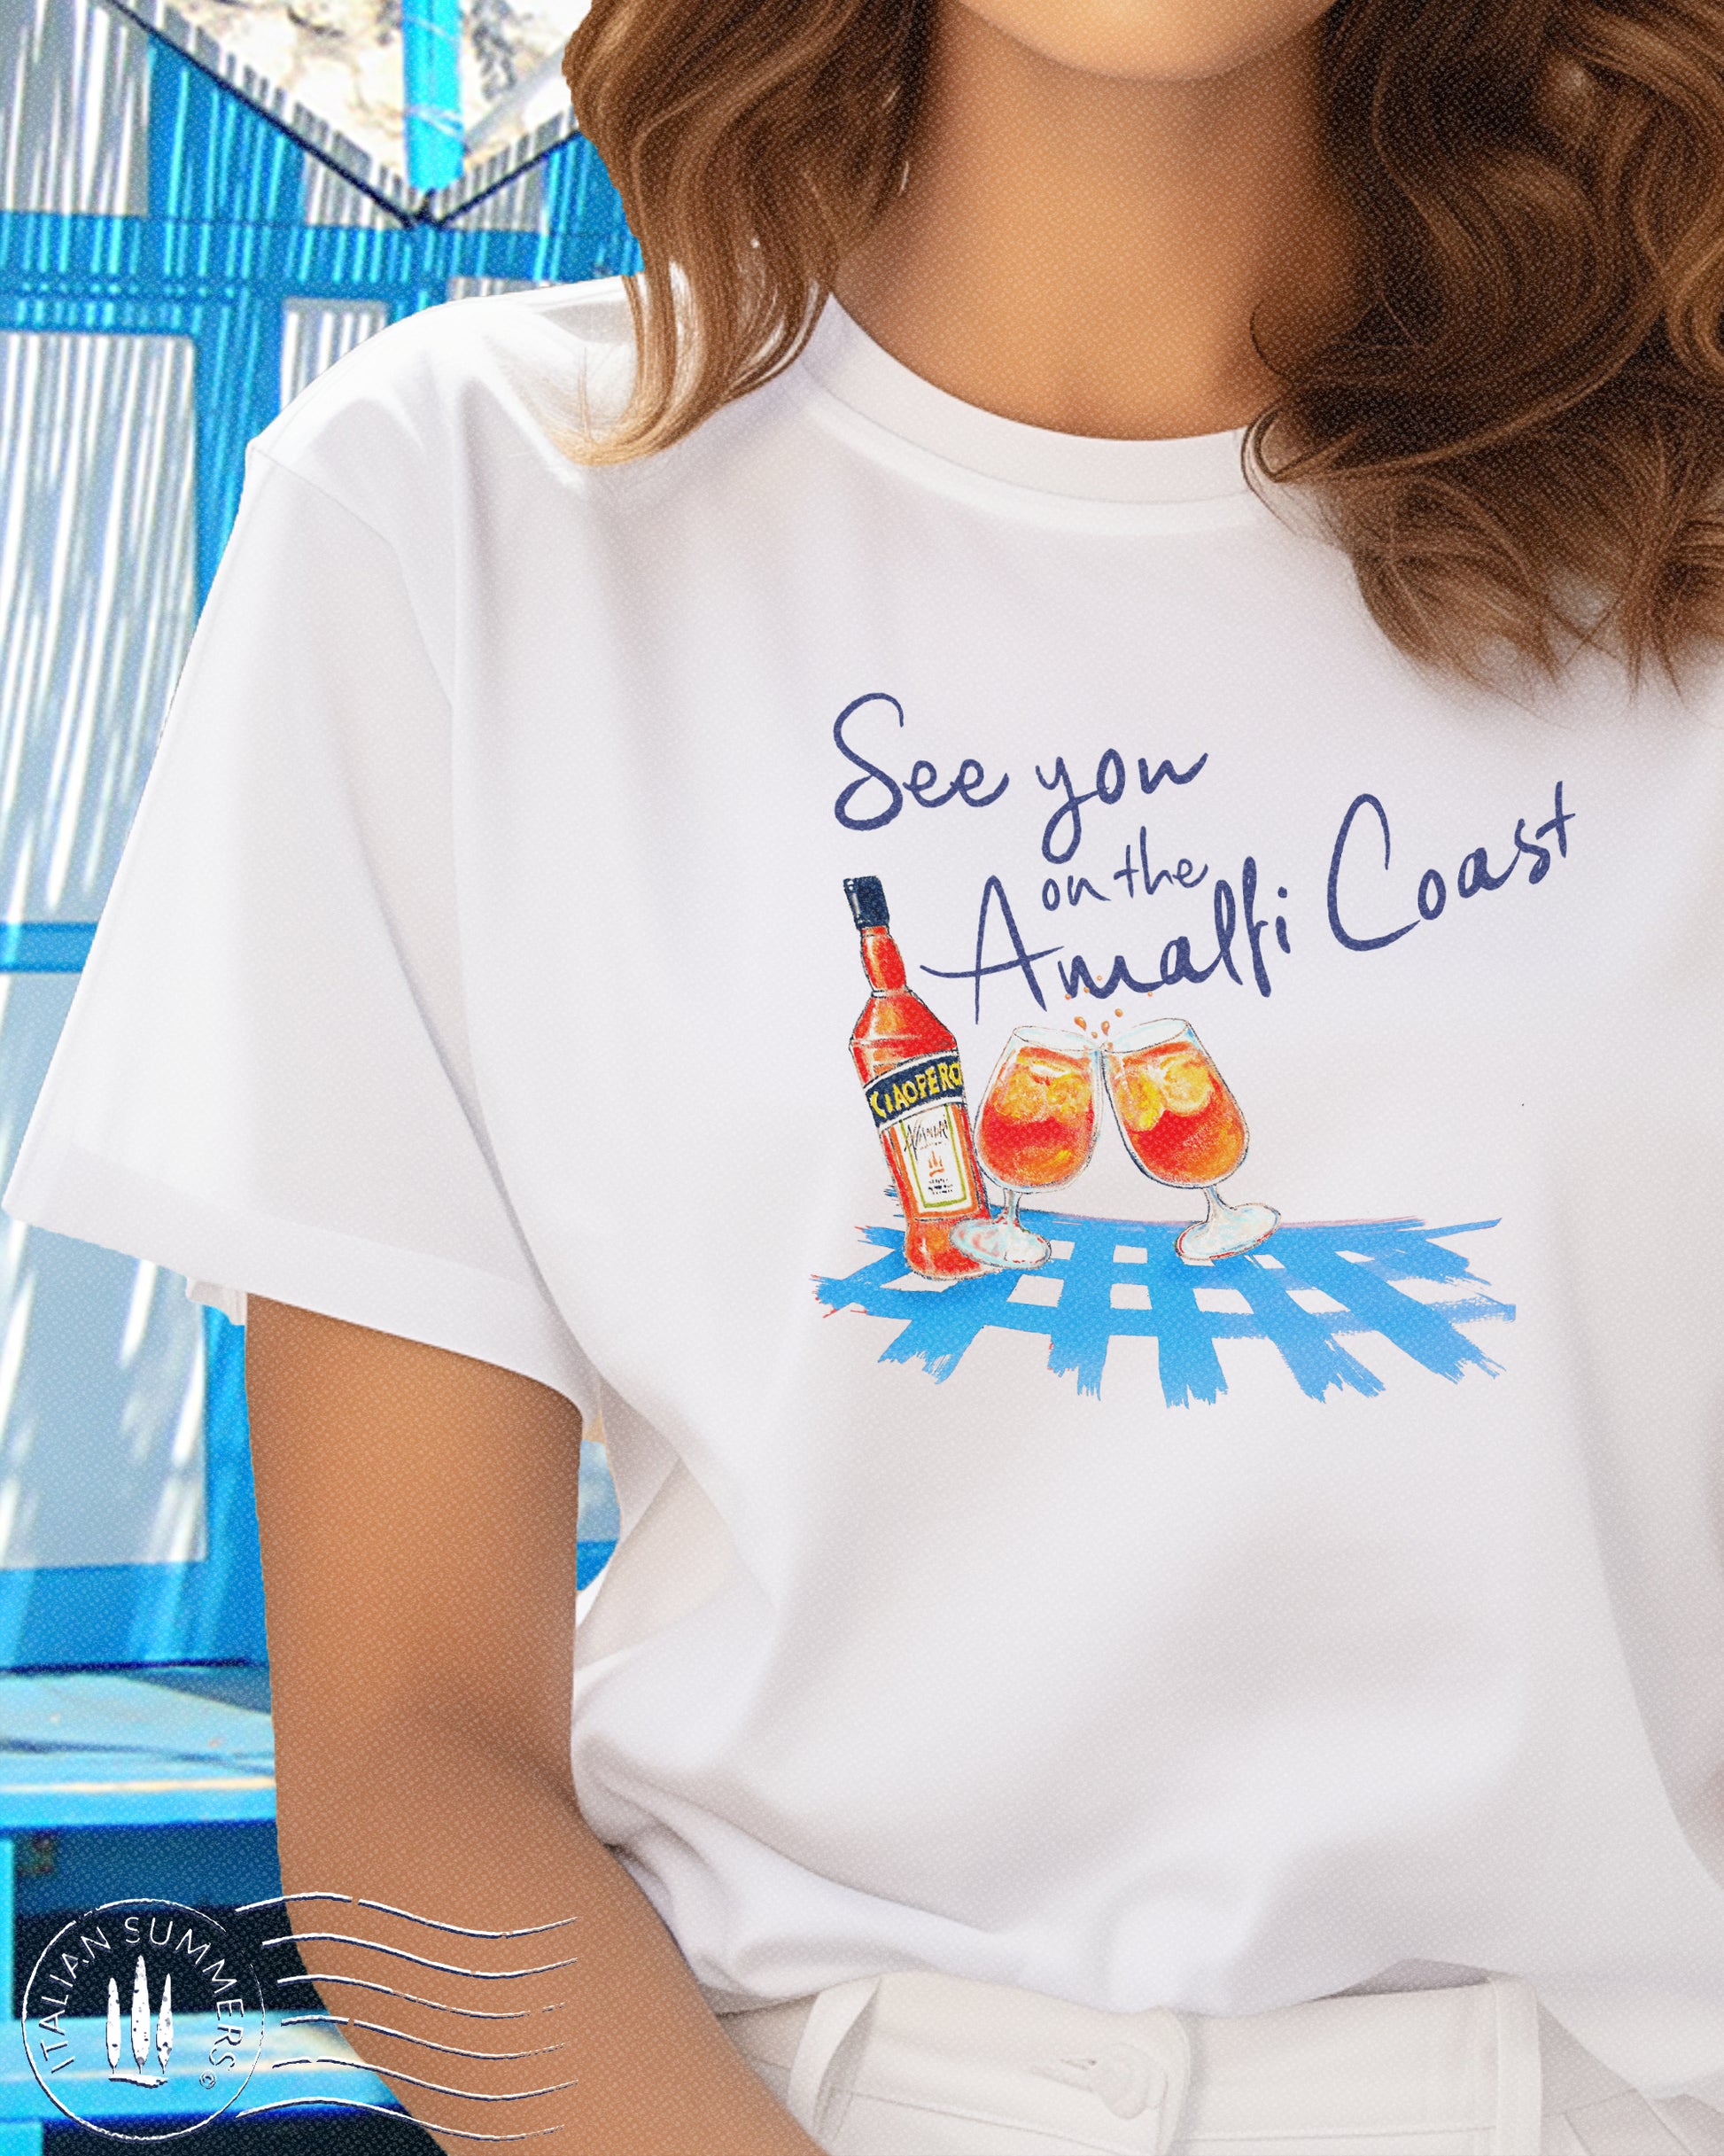 Italy inspired white t-shirt with the text See you on the Amalfi Coast in navy blue and a sketch in water color with an Aperol bottle and 2 glassis filled with Aperol Spritz on a bright blue table cloth.